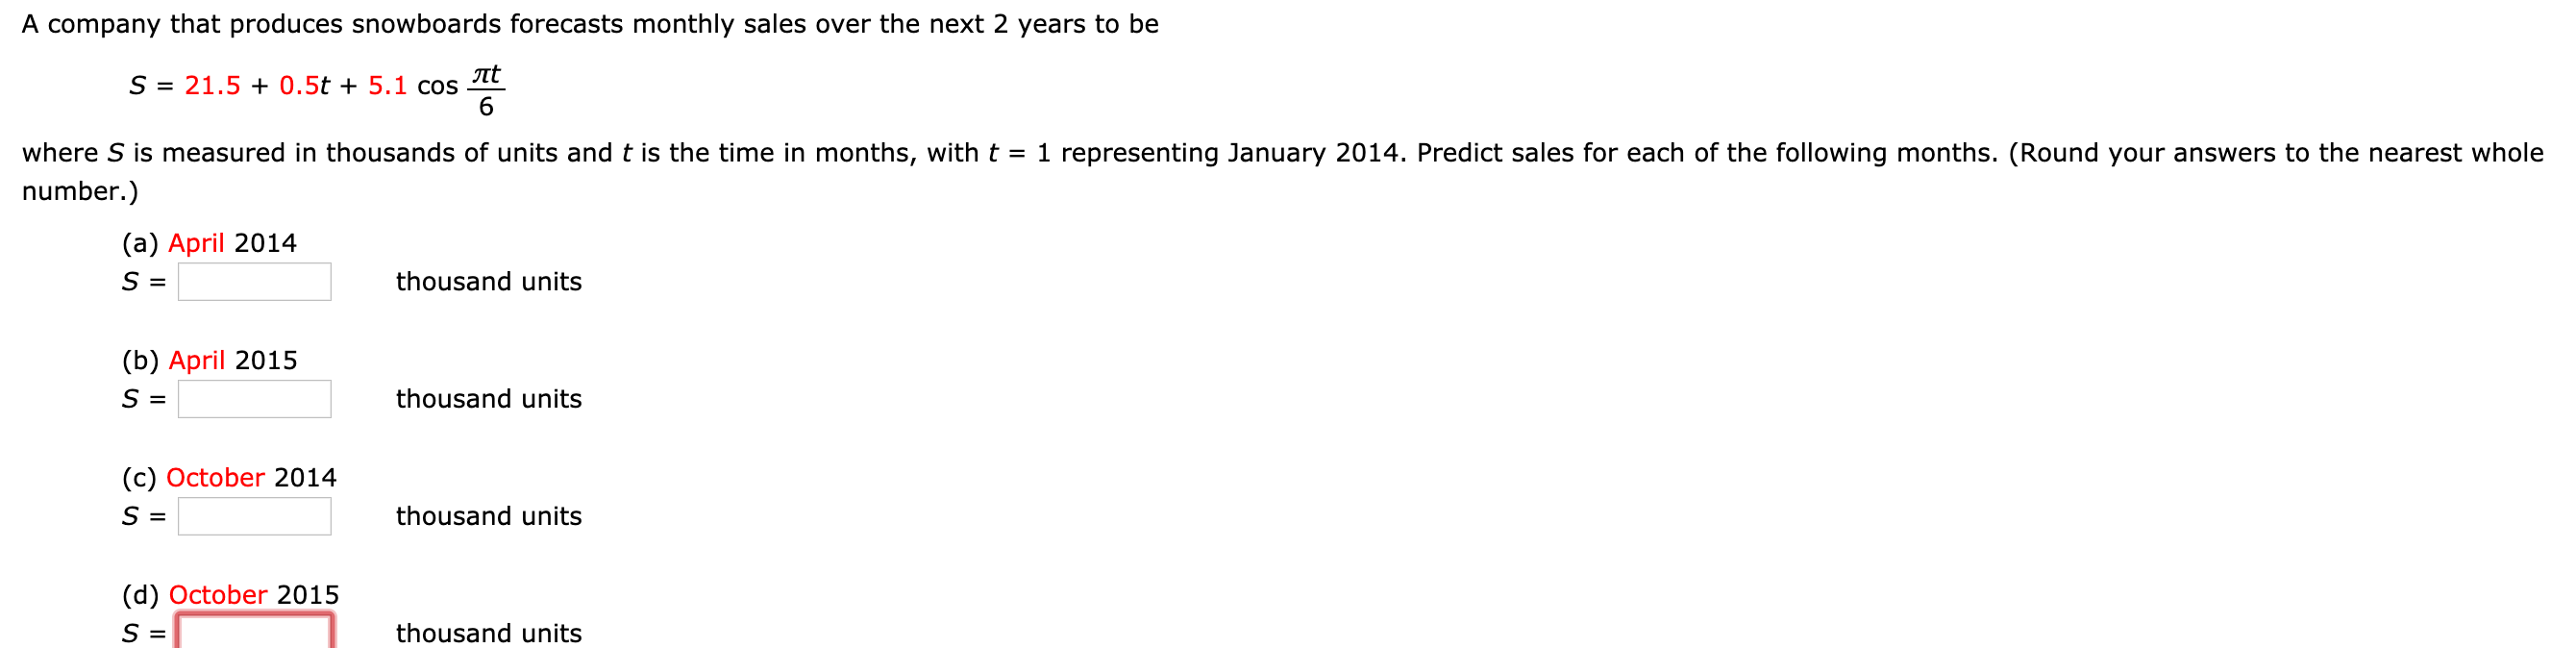 A company that produces snowboards forecasts monthly sales over the next 2 years to be
S
21.50.5t 5.1 cos
6
where S is measured in thousands of units and t is the time in months, with t-1 representing January 2014. Predict sales for each of the following months. (Round your answers to the nearest whole
number.)
(a) April 2014
S-
thousand units
(b) April 2015
thousand units
(c) October 2014
thousand units
(d) October 2015
thousand units
